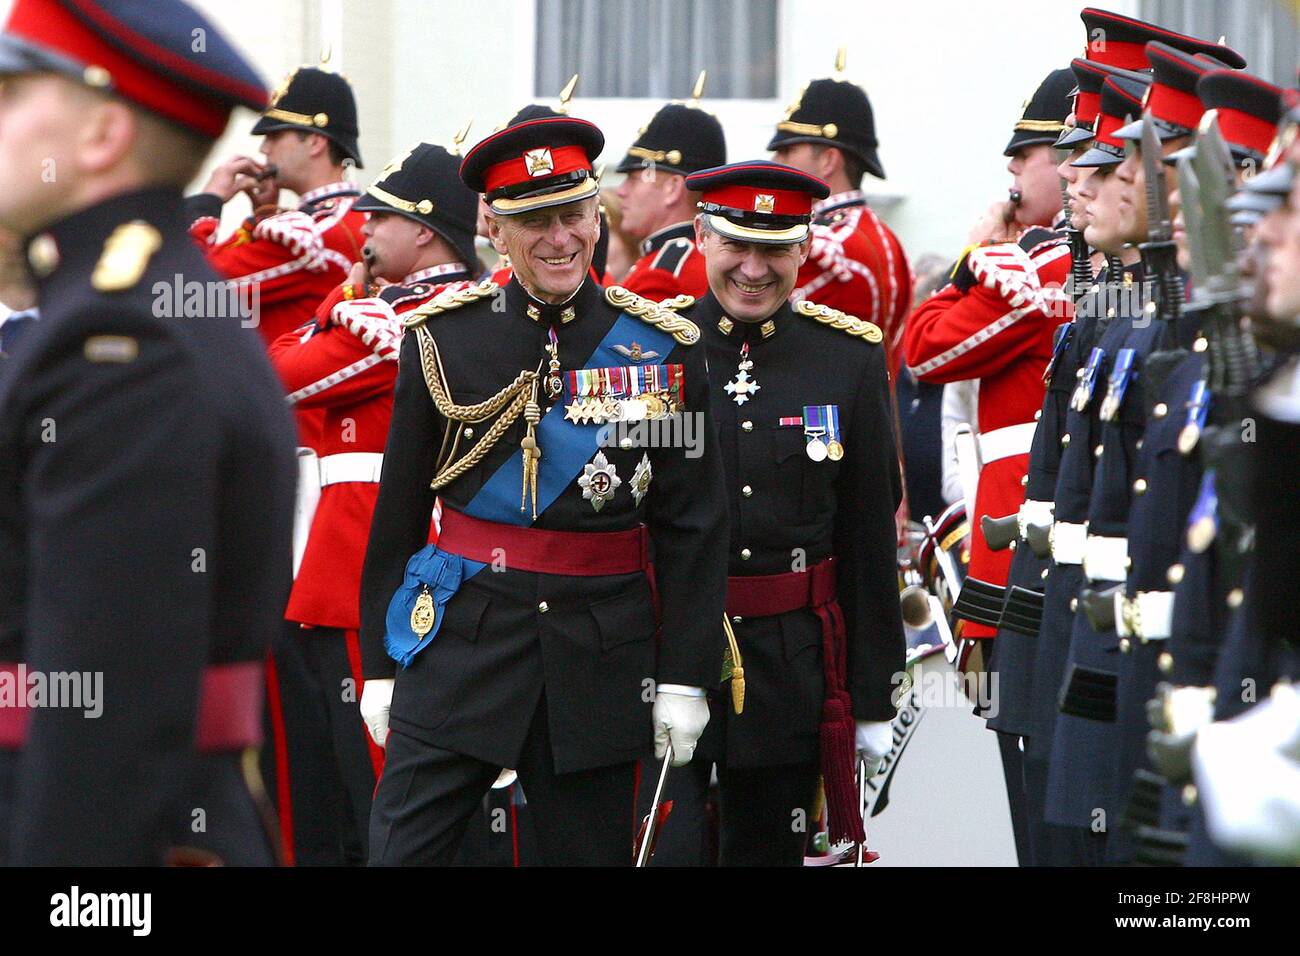 HRH Prince Philip The Duke of Edinburgh inspects the troops at Royal Gloucestershire, Berkshire and Wiltshire Regiment Museum in Salisbury in 2004. Stock Photo